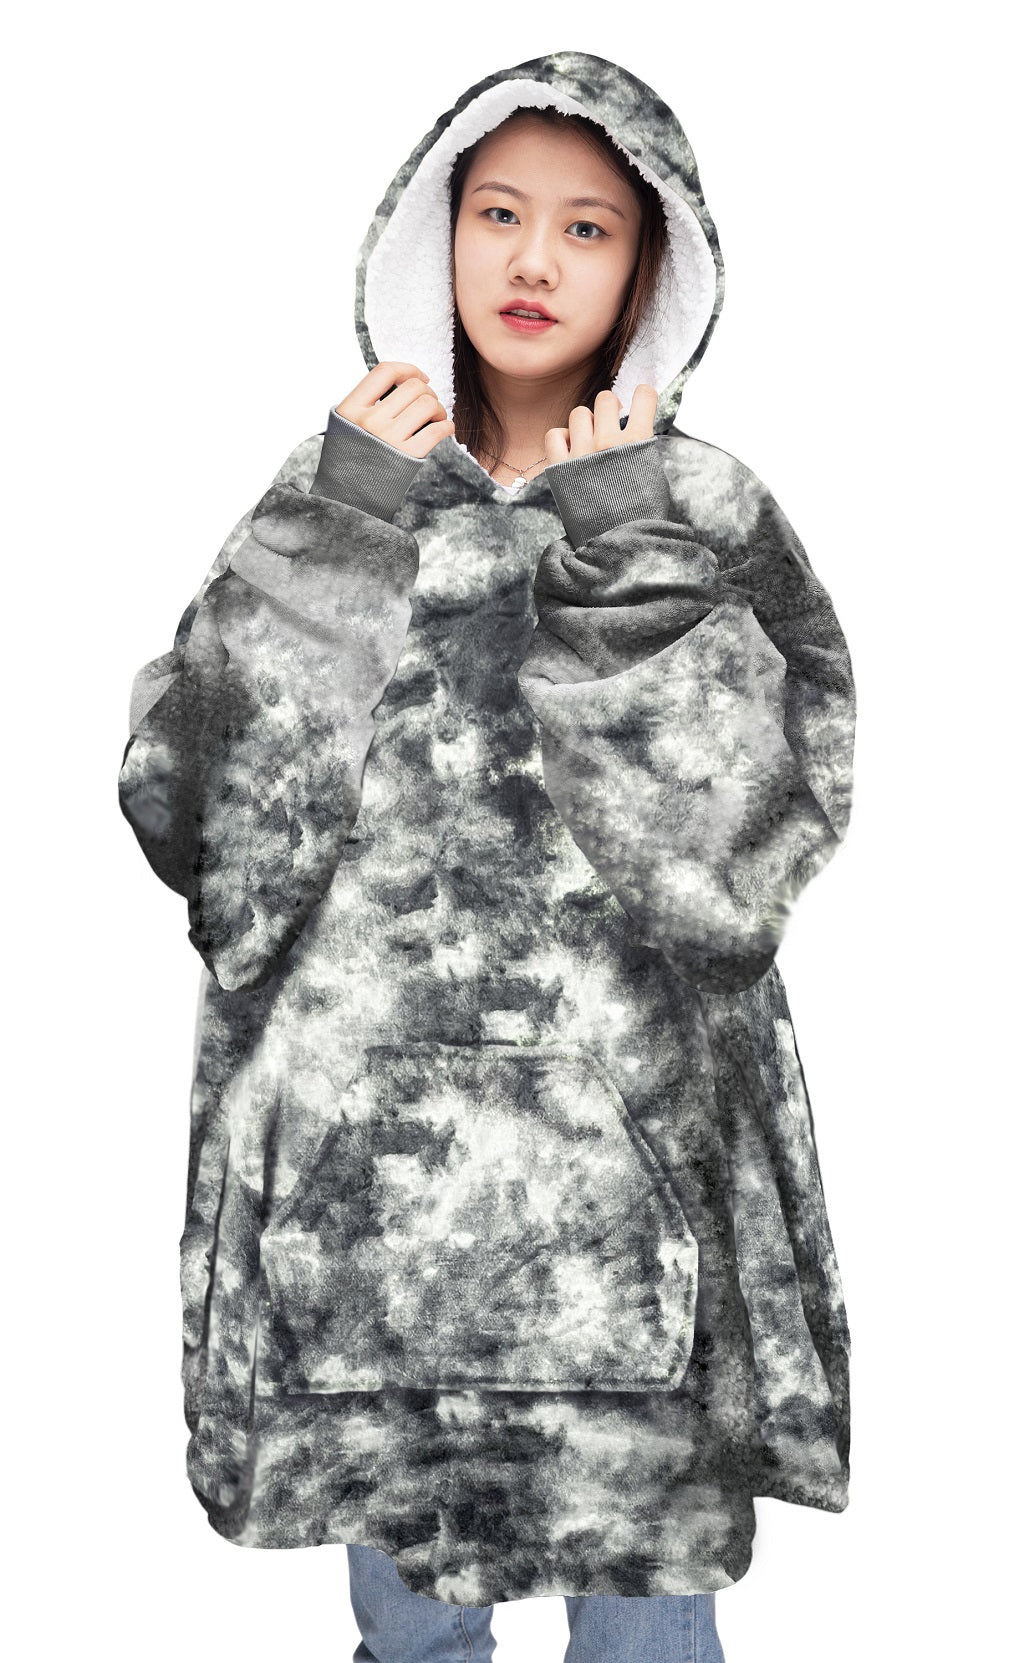 Grey Unisex Oversize Hoodie with Soft Outer Flannel - TheComfortshop.co.ukClothes0721718970170thecomfortshopTheComfortshop.co.ukgrey-white-unisex-oversize-hoddieGrey Unisex Oversize Hoodie with Soft Outer Flannel - TheComfortshop.co.uk